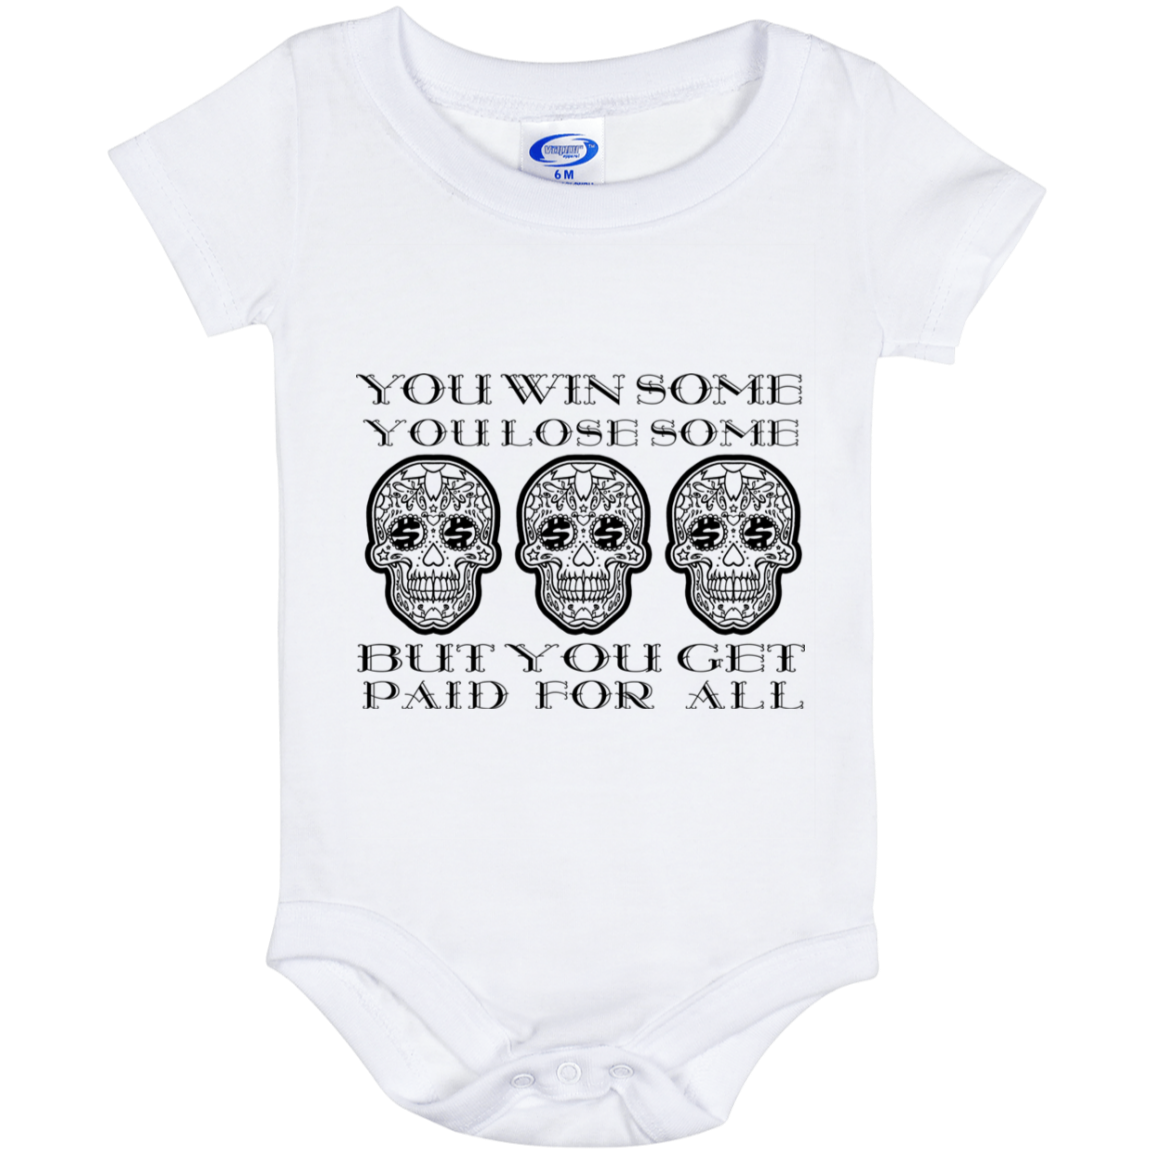 ArtichokeUSA Custom Design. You Win Some, You Lose Some, But You Get Paid For All. Baby Onesie 6 Month